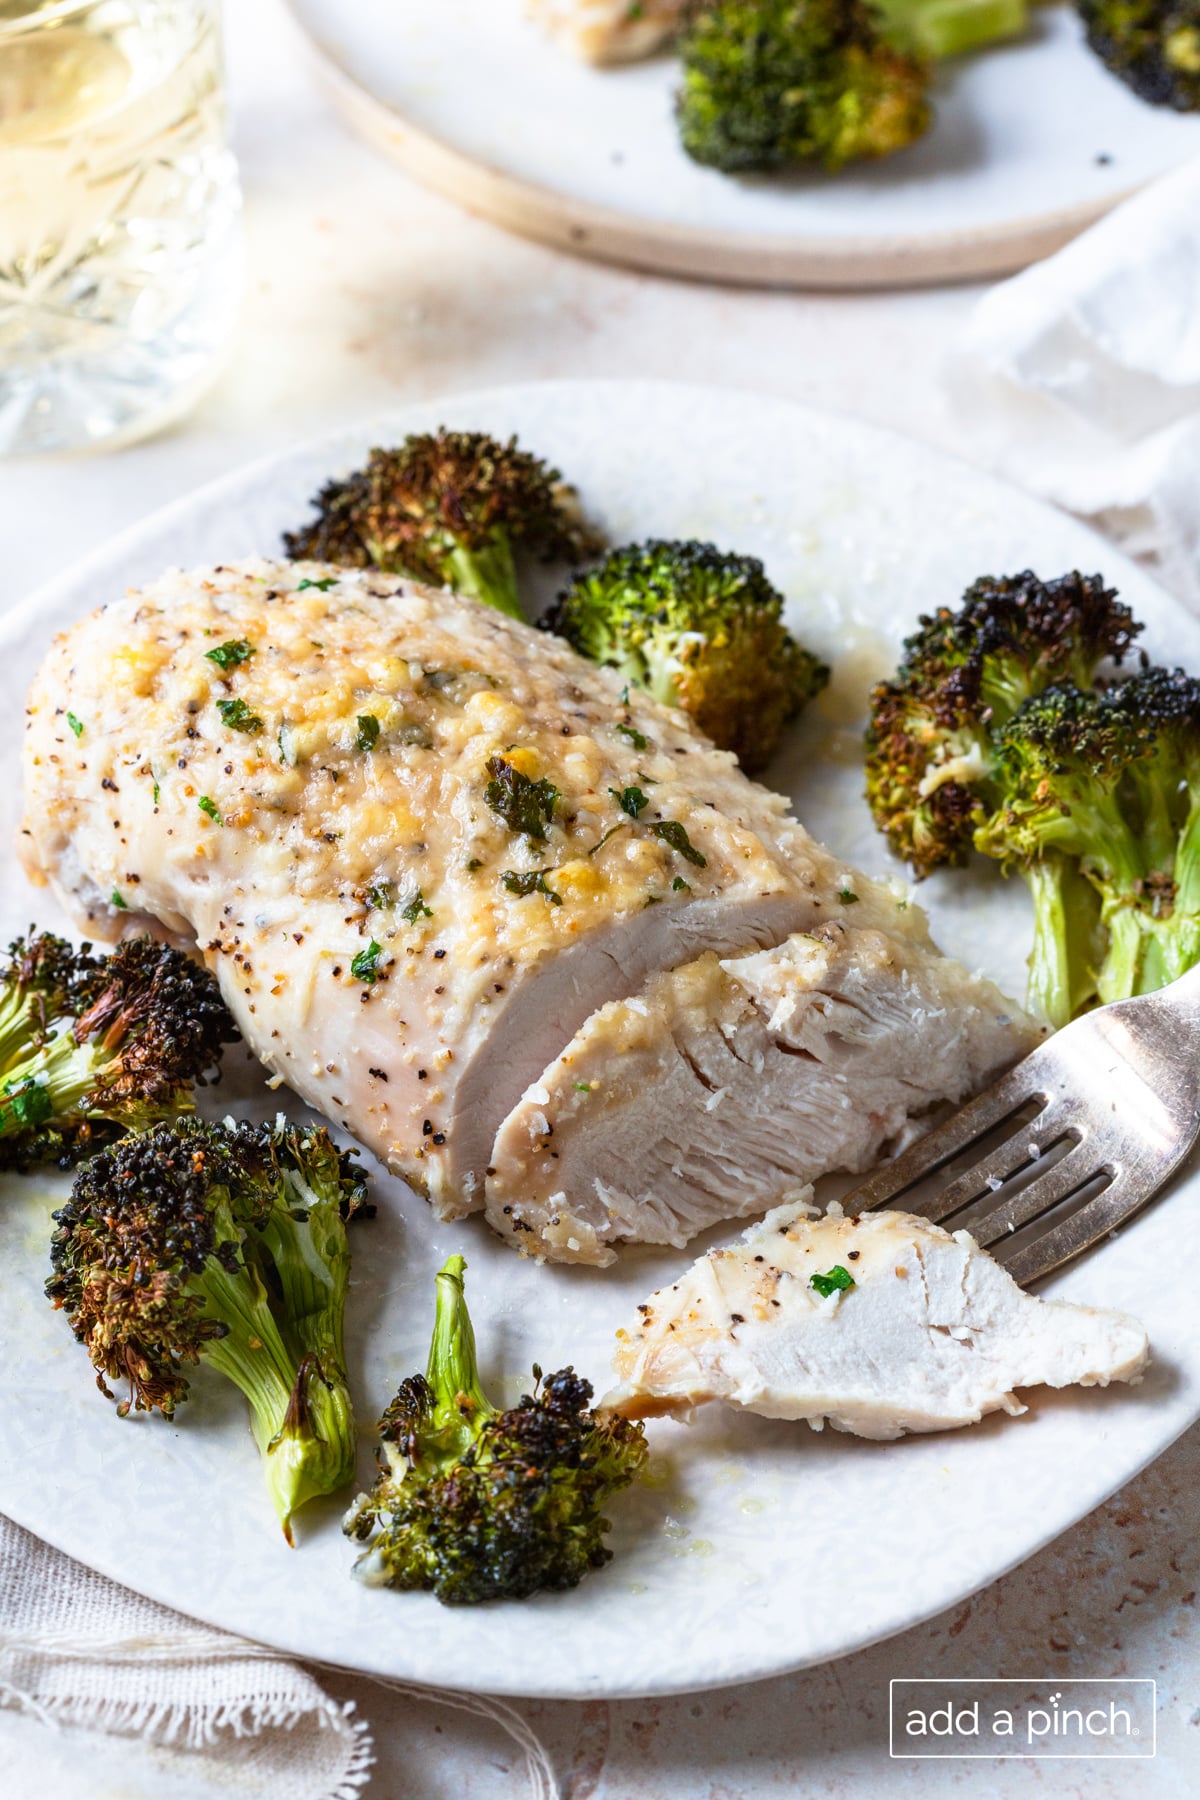 Photo of parmesan crusted chicken and broccoli on a white plate.